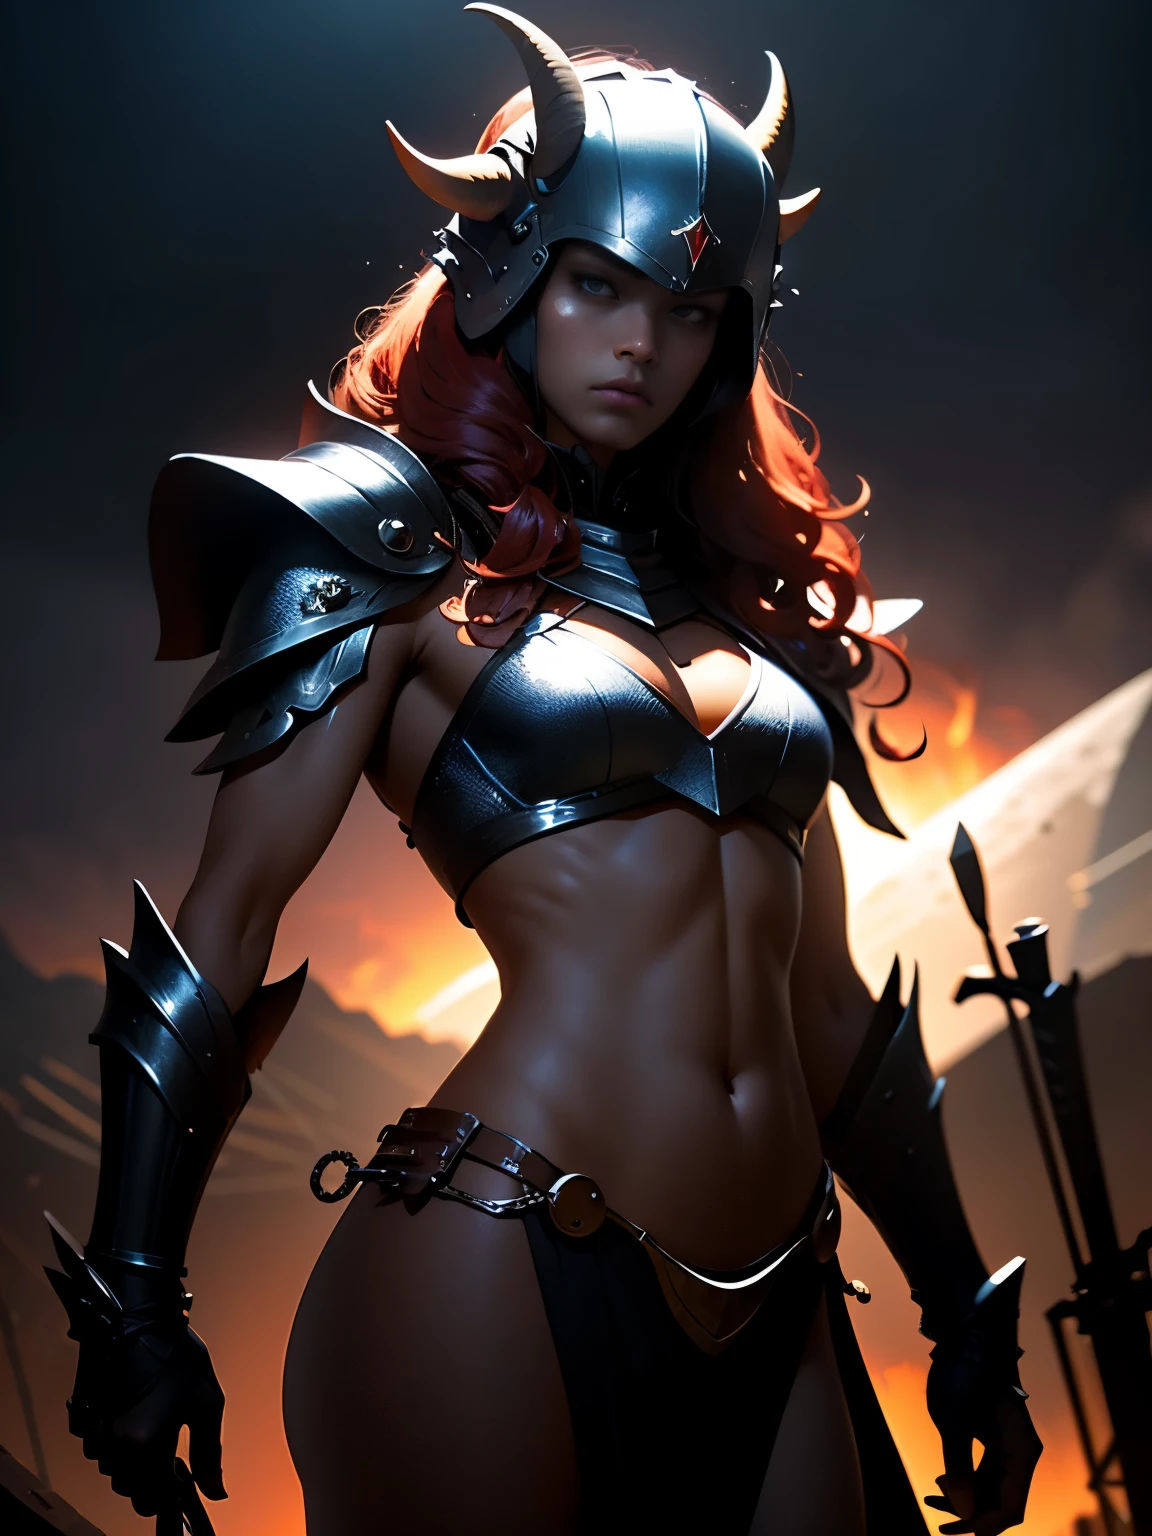 Beautiful female warrior from hell, Armor with great attention to detail, Detailed face, Stern expression, Glowing red eyes, Fiery Hair, Primitive clothing, A helmet with large goat horns, Platinum Breastplate, Scars of battle, Muscular, With a bloody sword, Dark cloudy sky, Lightning strikes, Ruins and destruction in the background, Moody lighting, Structure of the film, Digital Art, Very detailed, Realistic, A calming color palette, Dark fantasy, slim, Different space